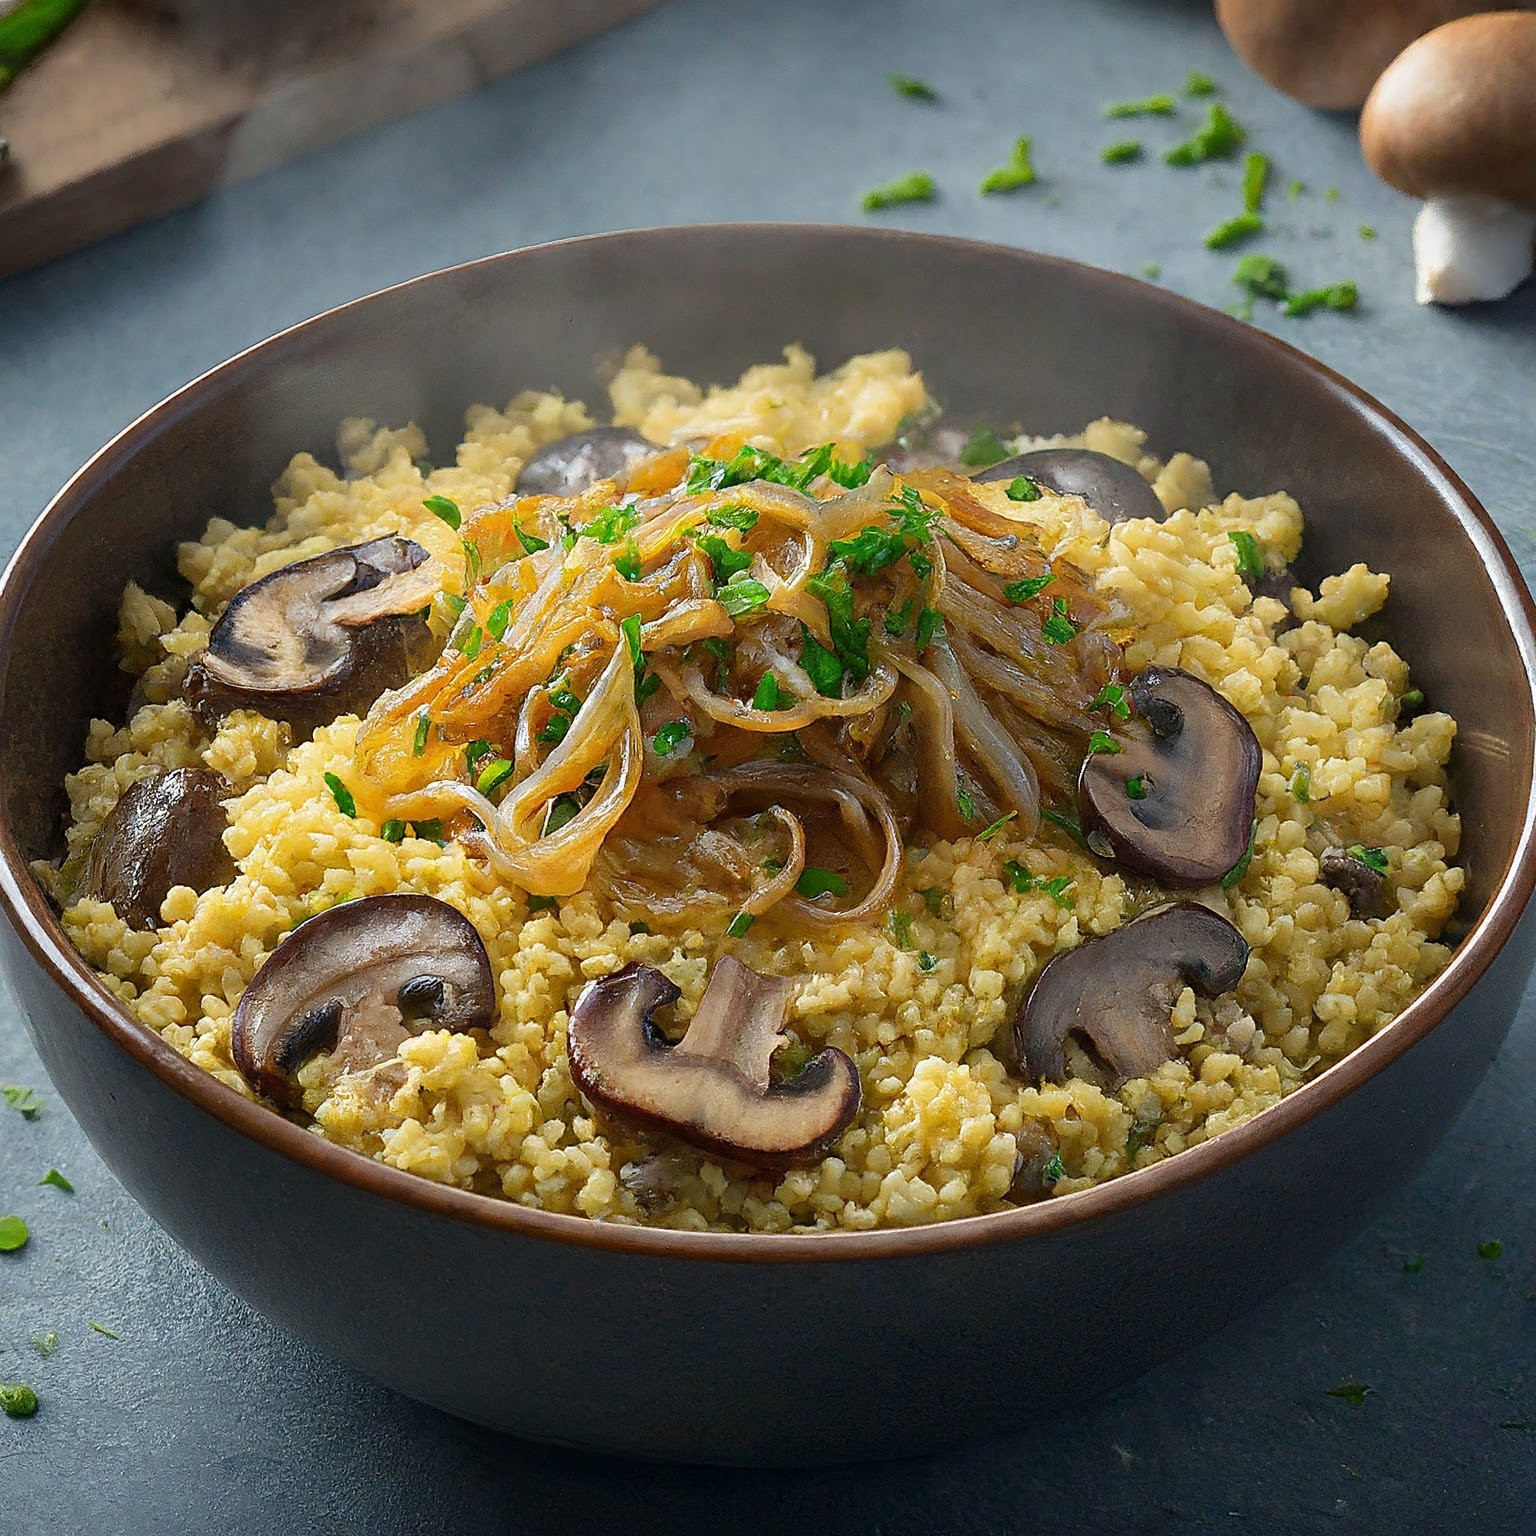 Steaming dish of Millet Pilaf with golden brown millet, caramelised onions, sauteed mushrooms, and fresh herbs.